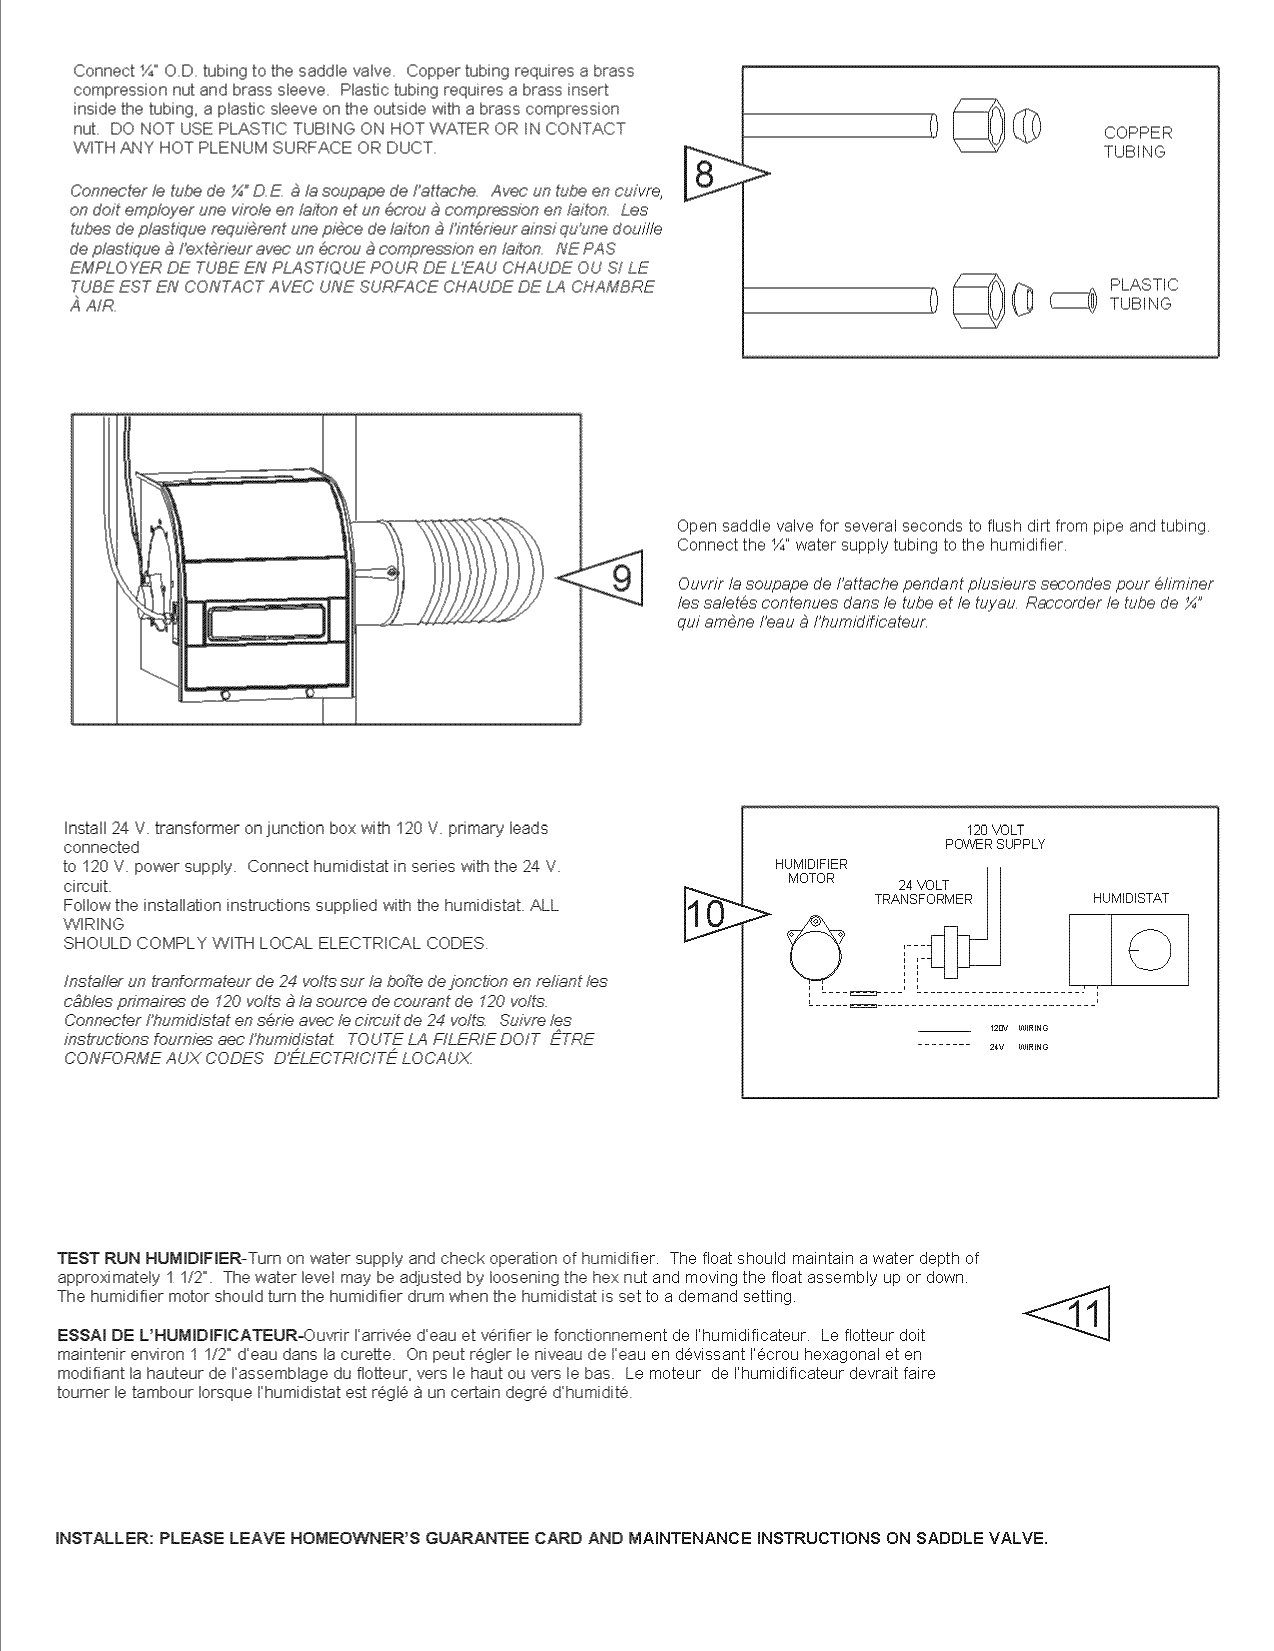 Page 3 of 4 - Generalaire GENERAL 65 User Manual  HUMIDIFIER - Manuals And Guides L1002566